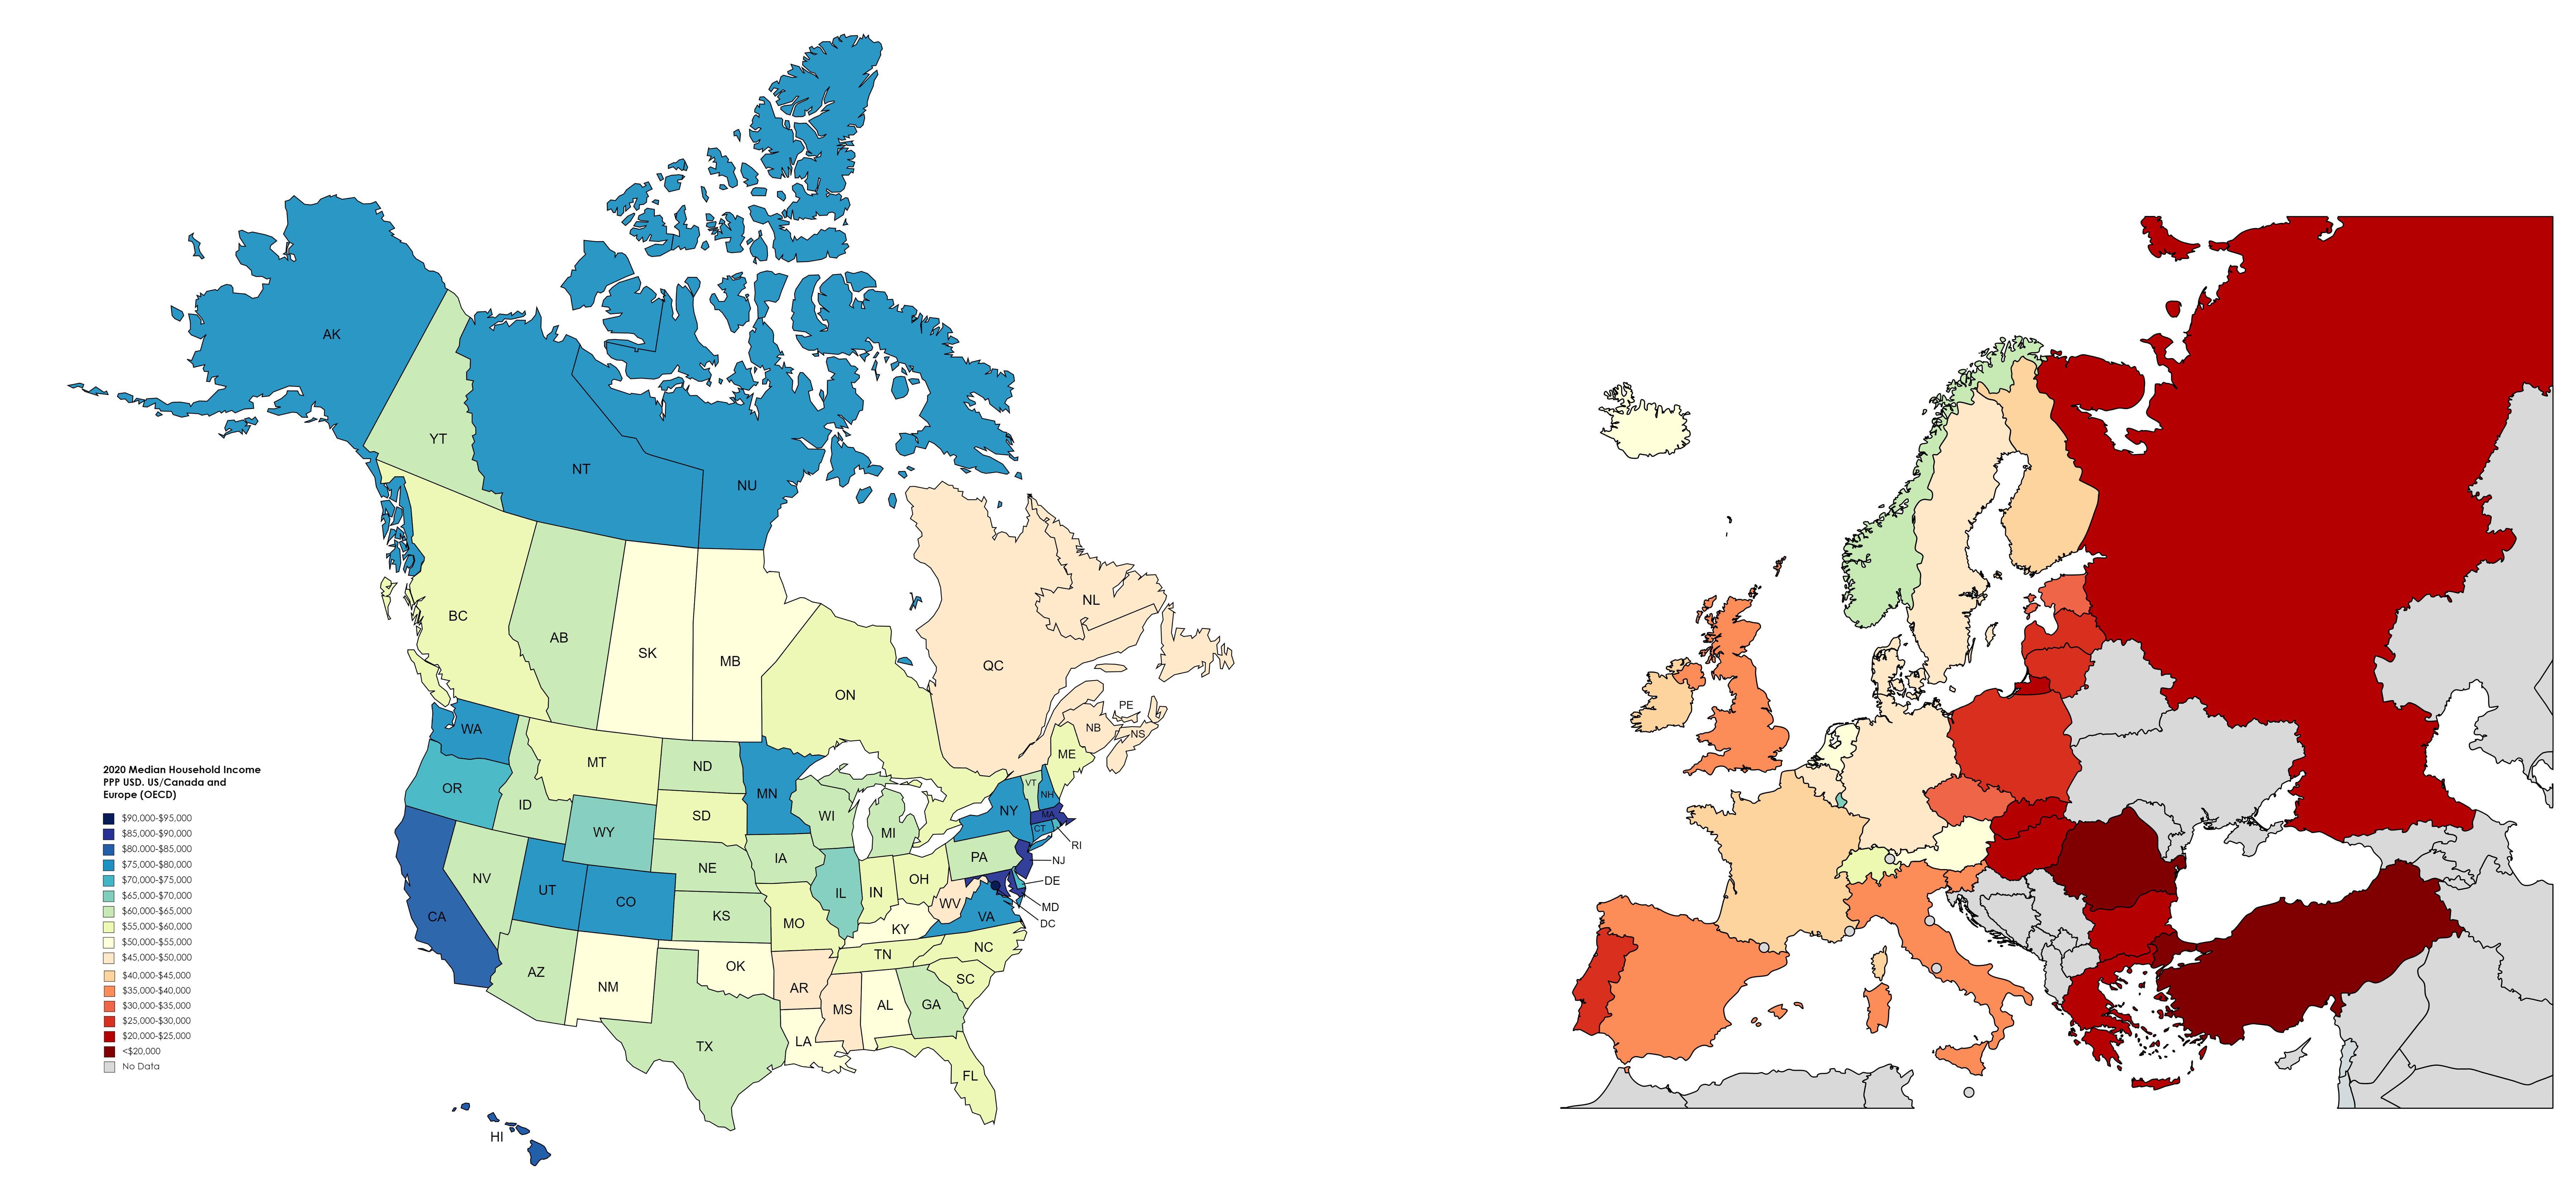 median-household-income-in-us-canada-and-europe-usd-ppp-2020-v0-b8d8jv3w4mma1.jpg